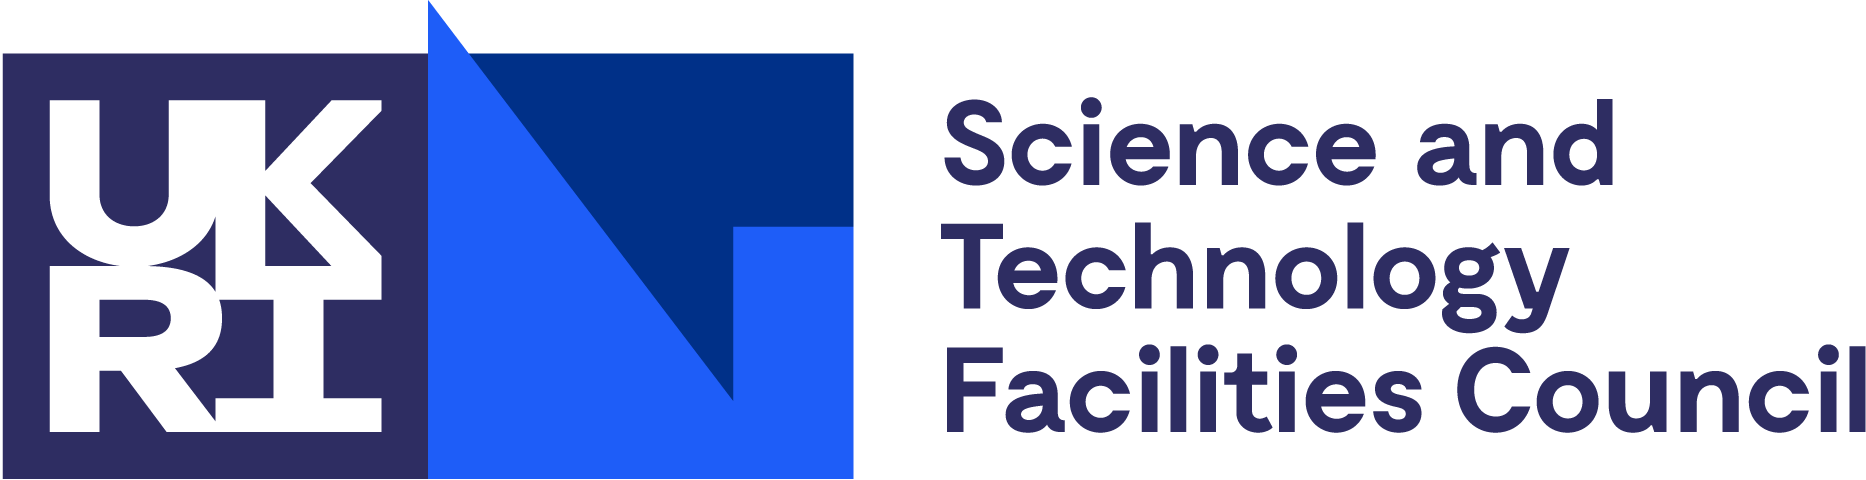 Science and Technology Facilities Council (Copy)